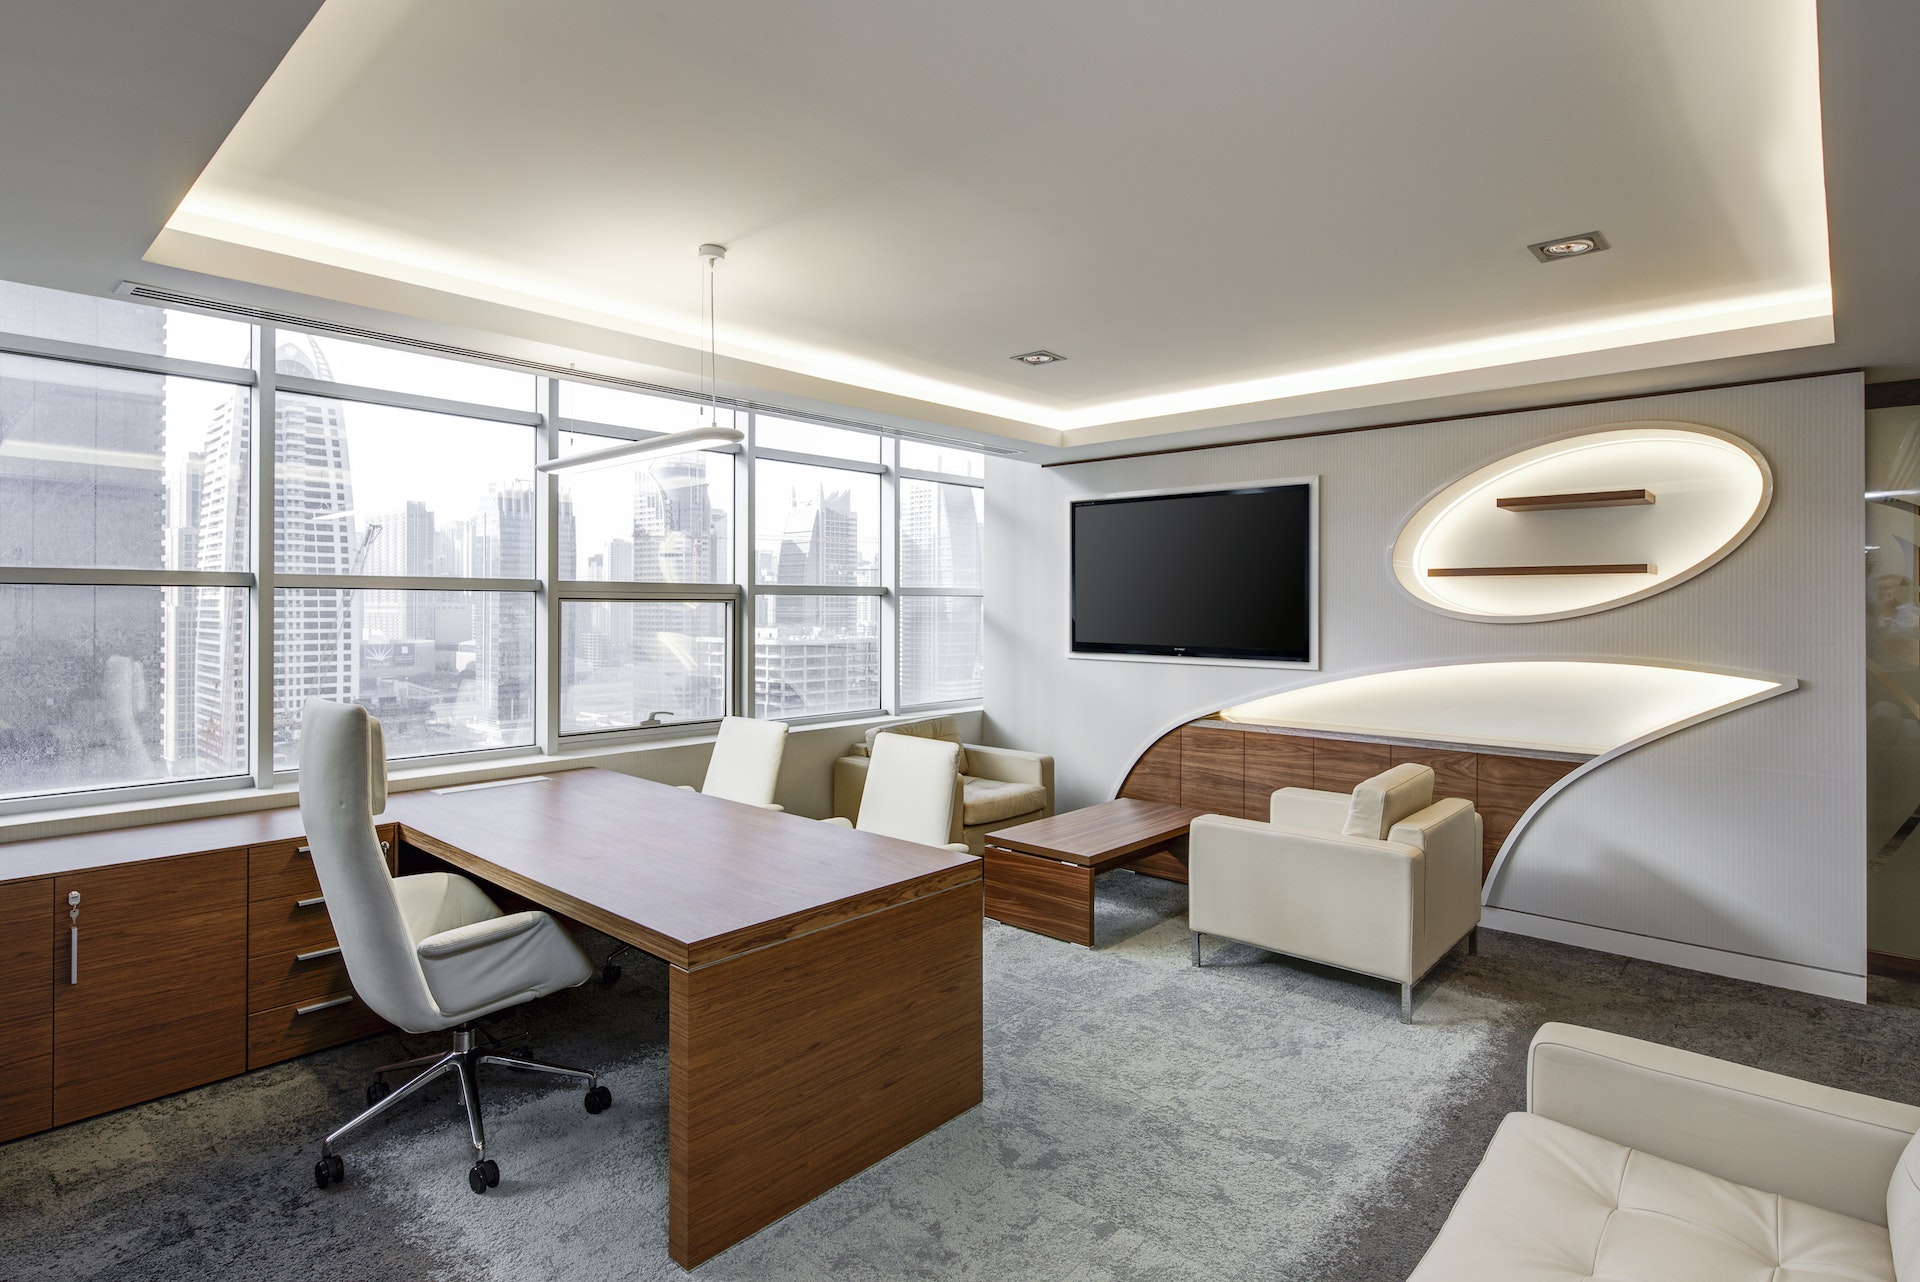 The Differences Between Normal and Office Furniture